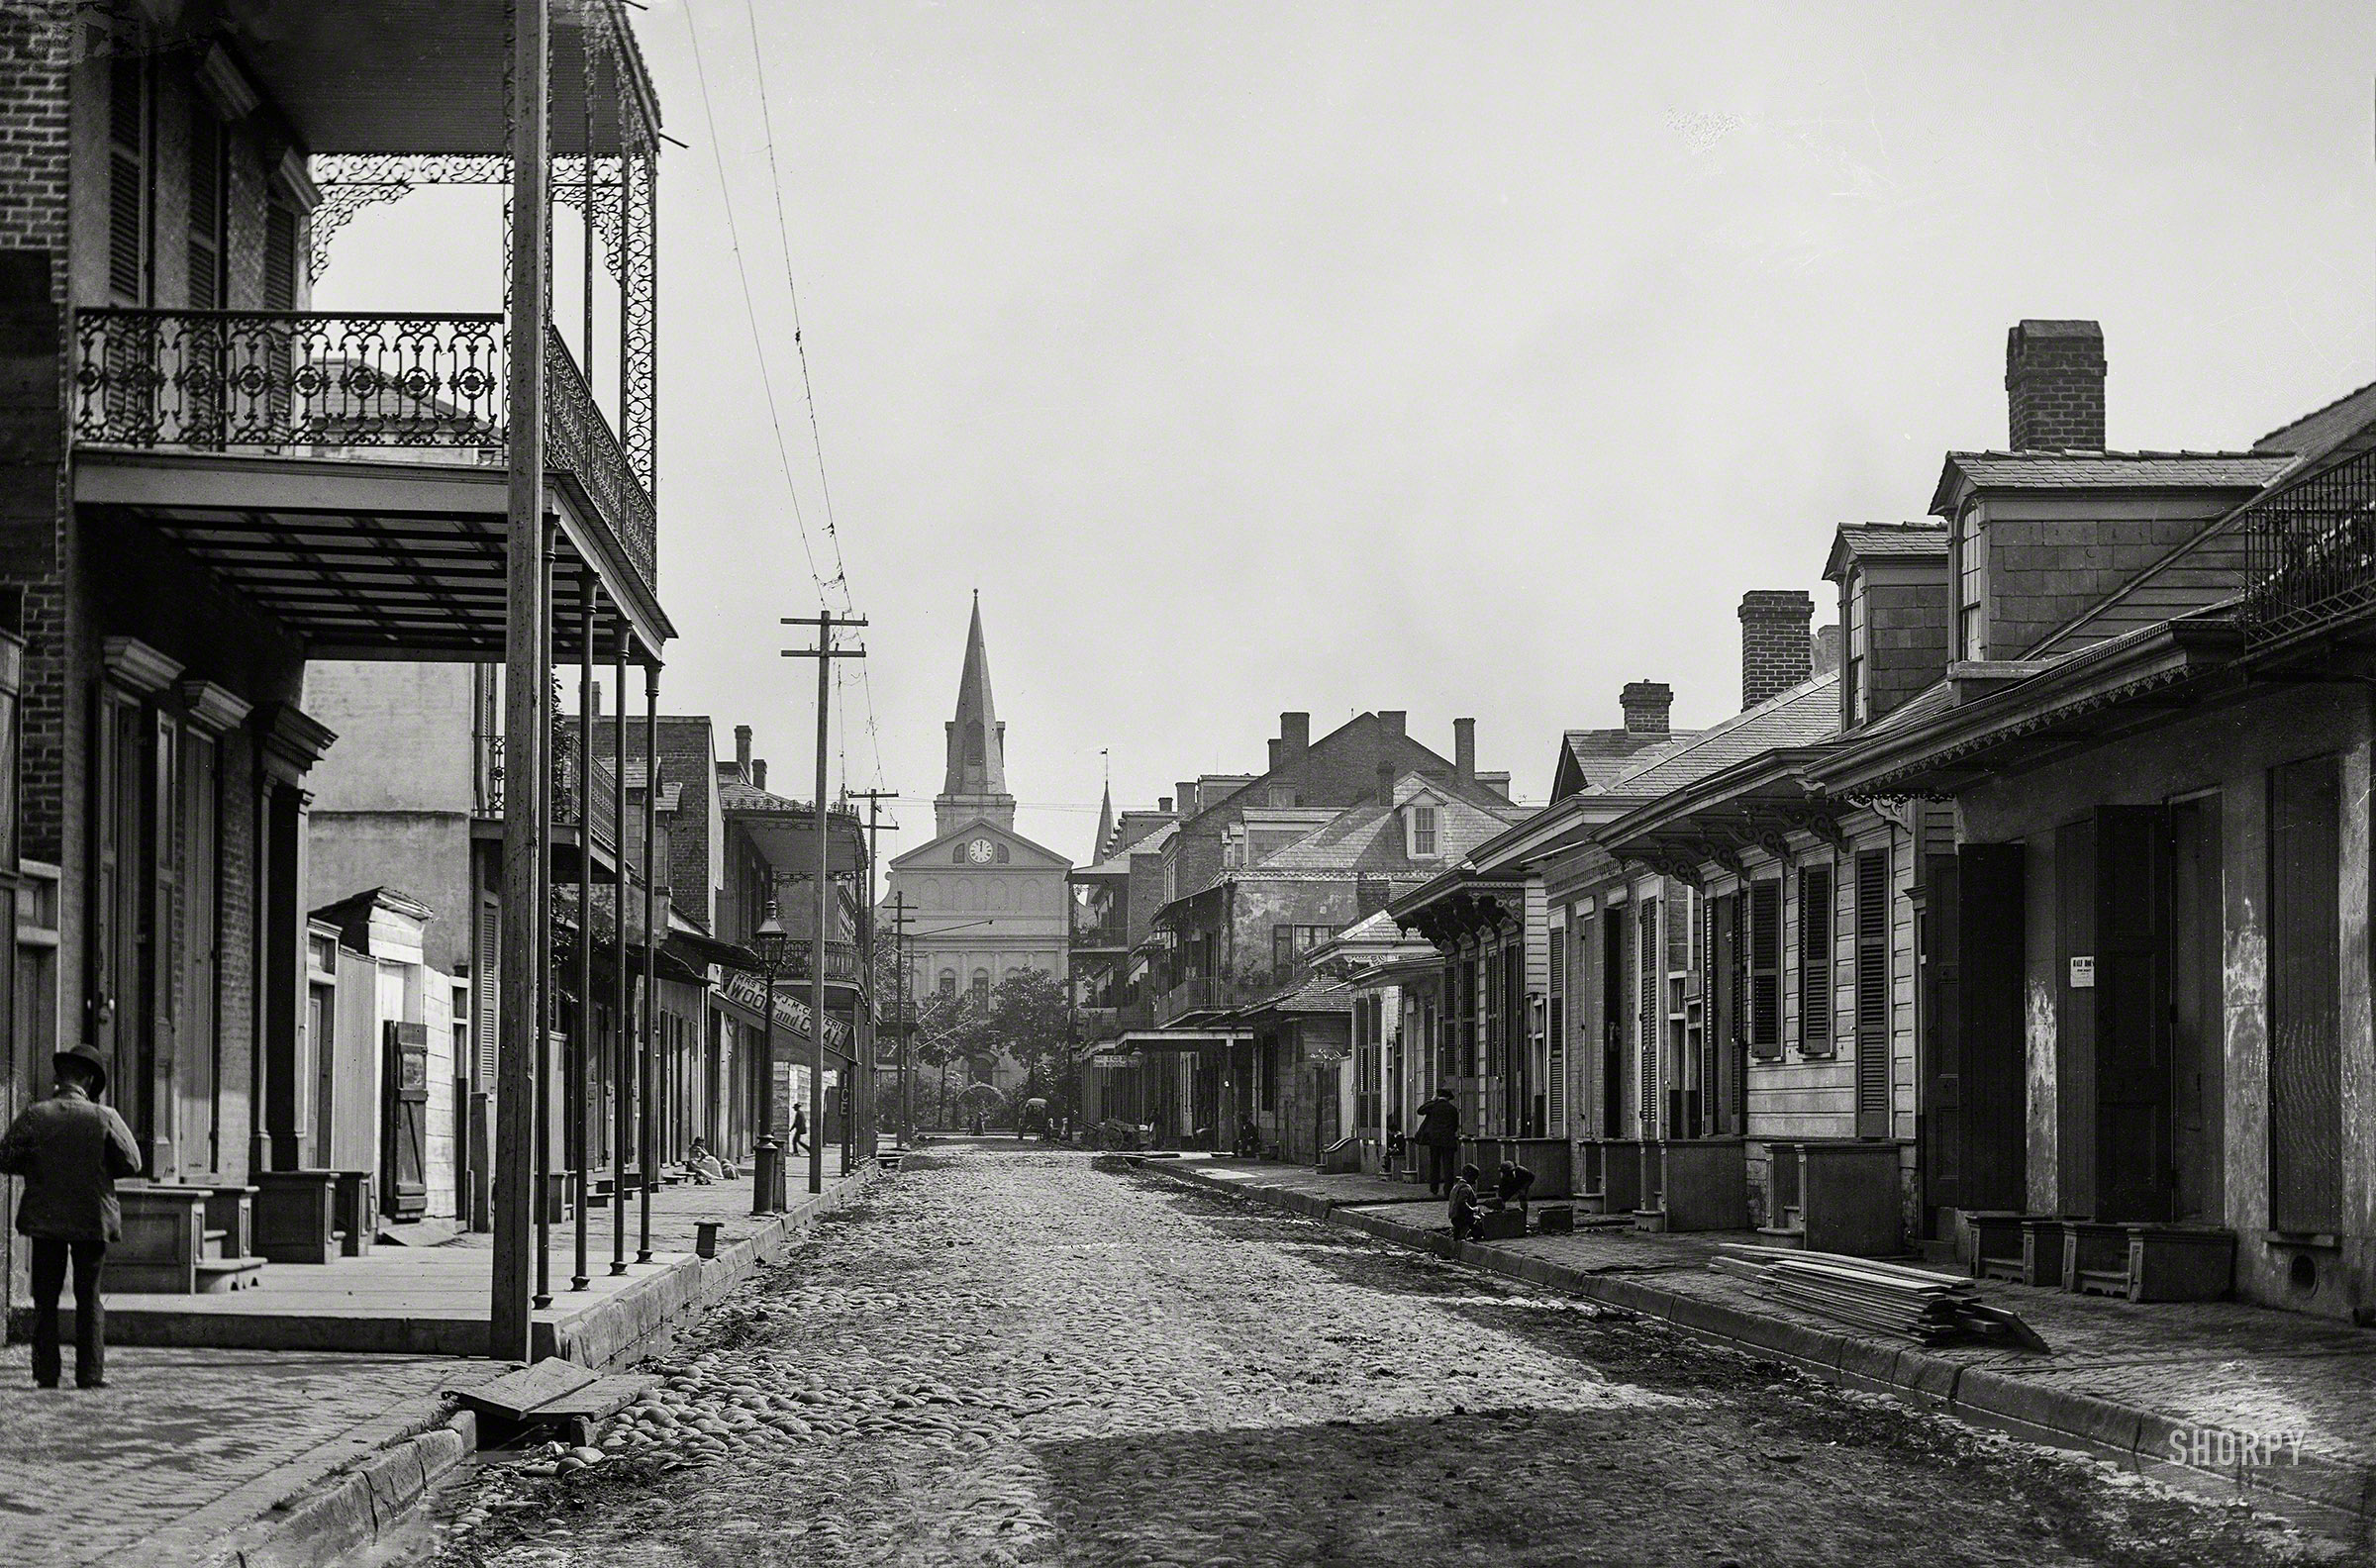 Circa 1890. "Street in New Orleans near Cathedral of St. Louis." 5x7 inch glass negative by William Henry Jackson. View full size.